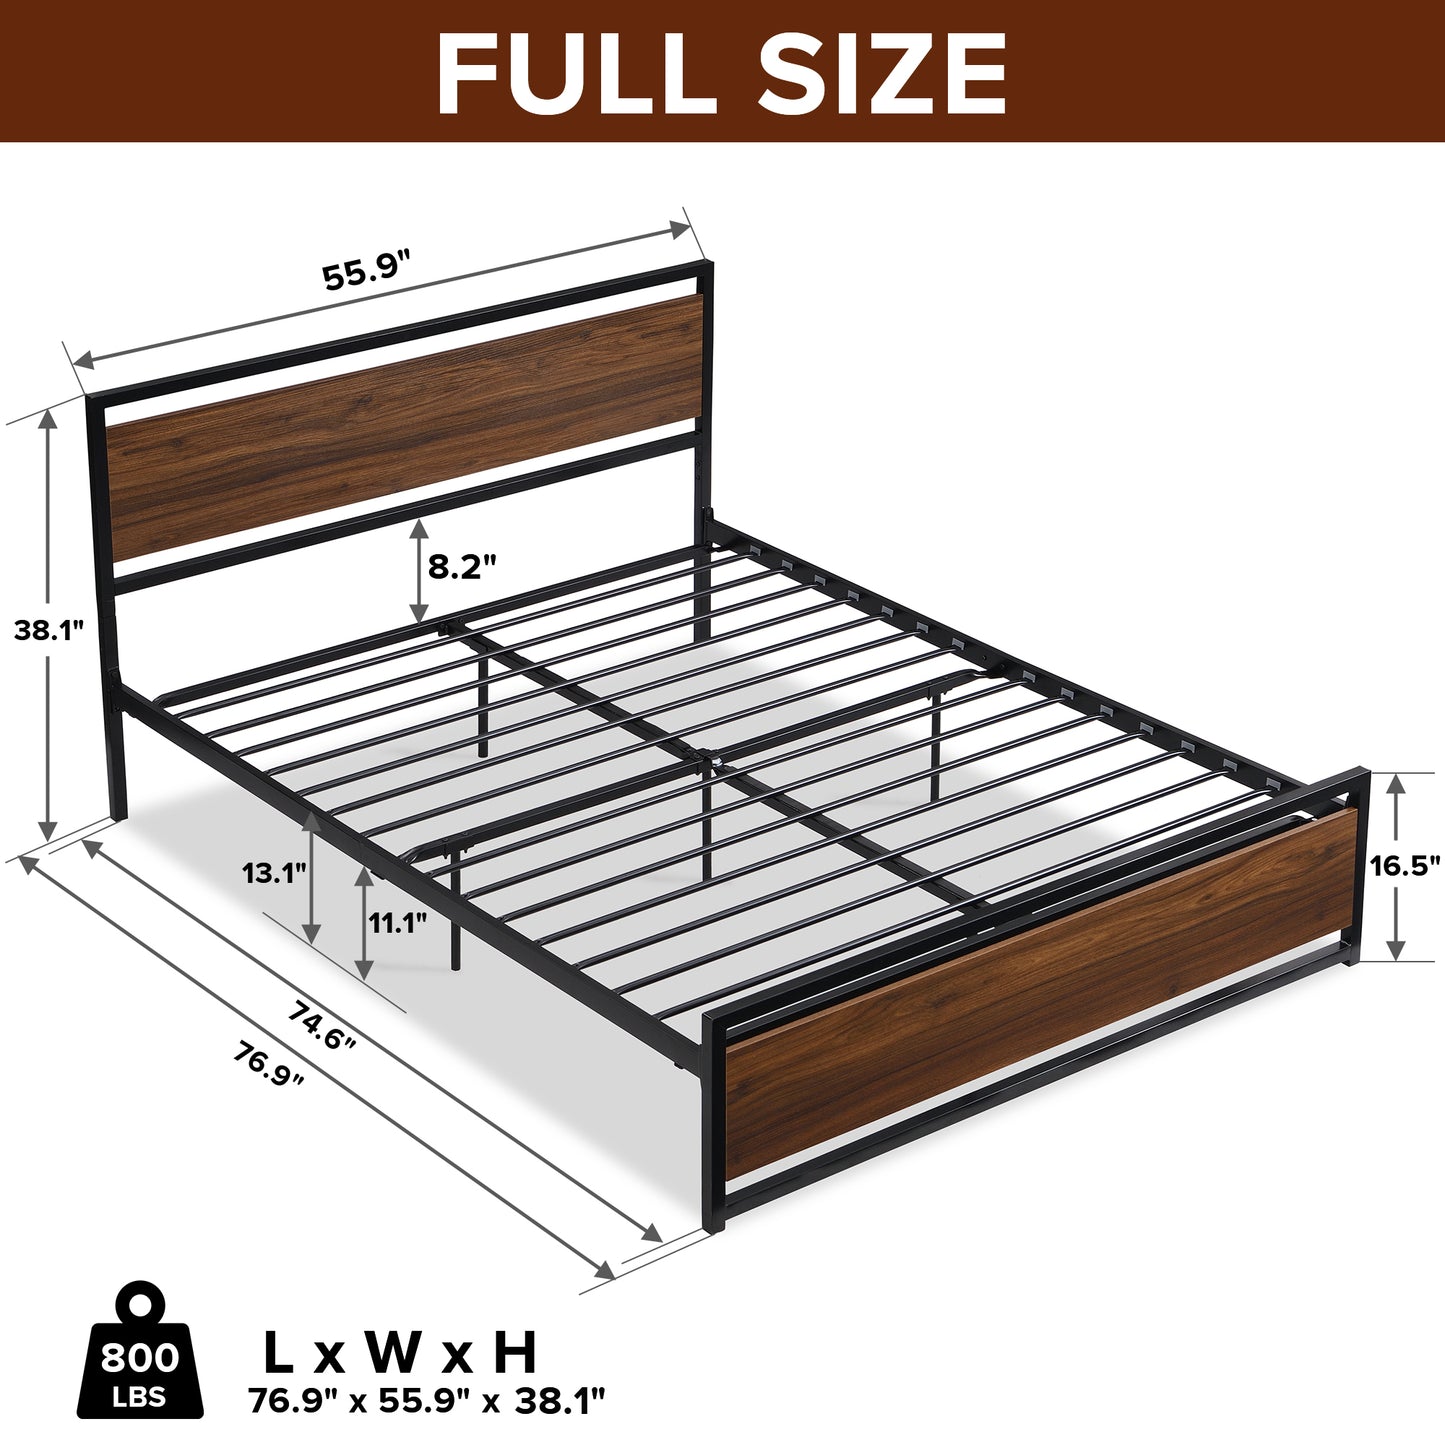 SYNGAR Black Iron Platform Bed Frame Full Size With Wooden Headboard and Footboard, New Upgrade Metal Legs Design, Industrial Full Bed Frame with Strong Slat Support